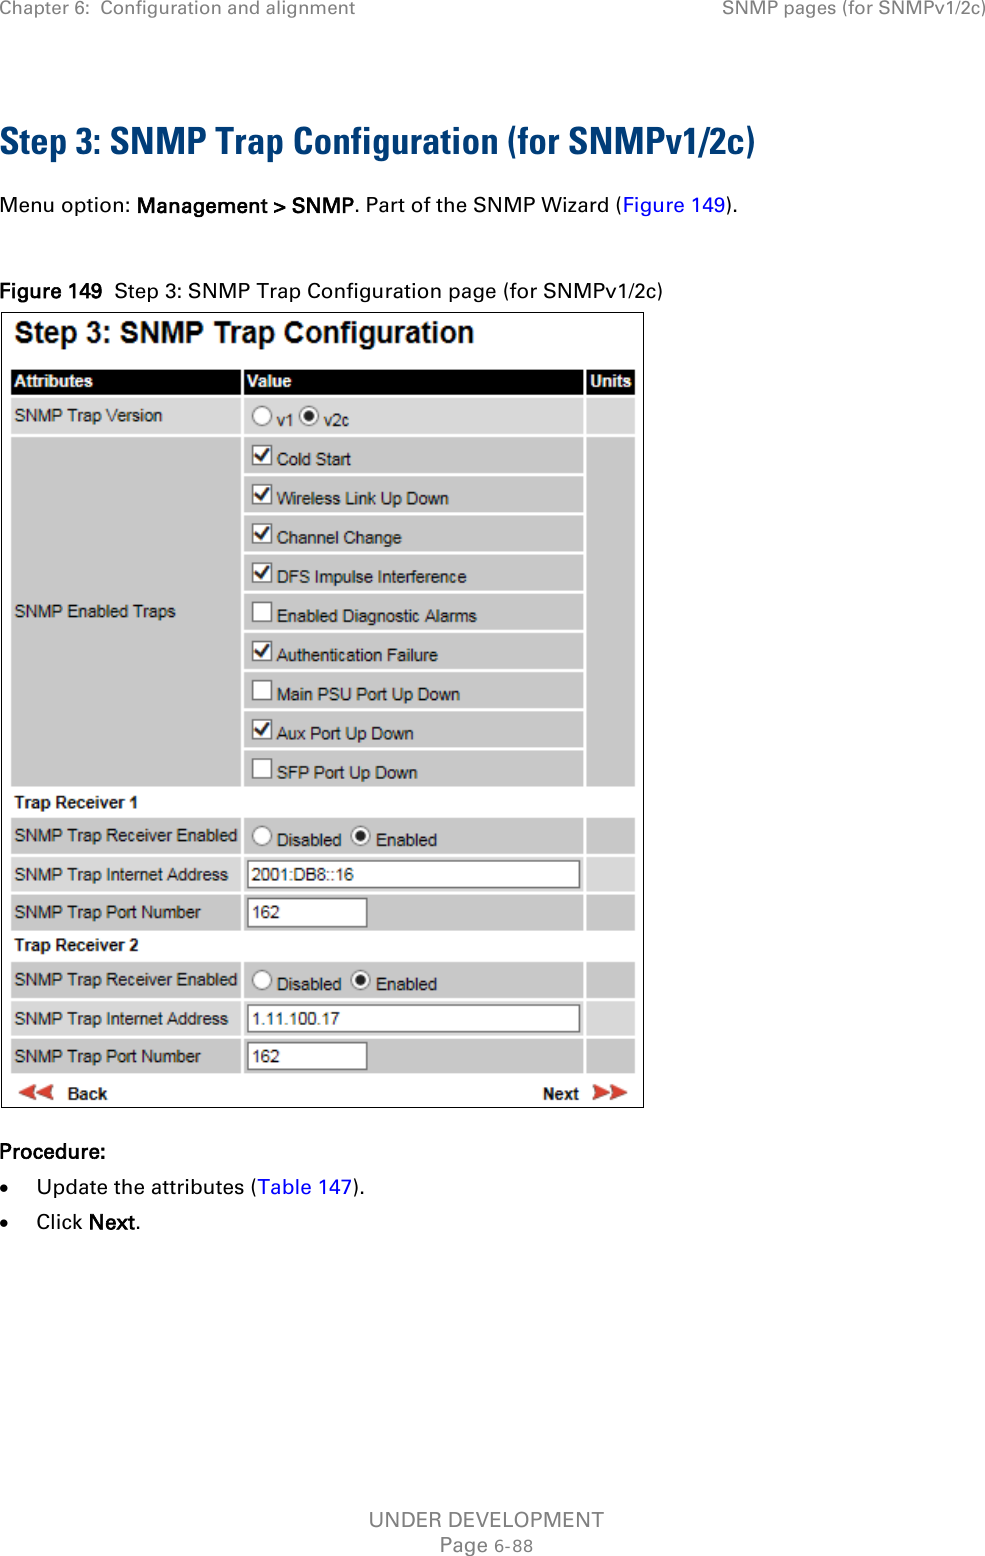 Chapter 6:  Configuration and alignment SNMP pages (for SNMPv1/2c)  Step 3: SNMP Trap Configuration (for SNMPv1/2c) Menu option: Management &gt; SNMP. Part of the SNMP Wizard (Figure 149).  Figure 149  Step 3: SNMP Trap Configuration page (for SNMPv1/2c)  Procedure: • Update the attributes (Table 147). • Click Next.     UNDER DEVELOPMENT Page 6-88 